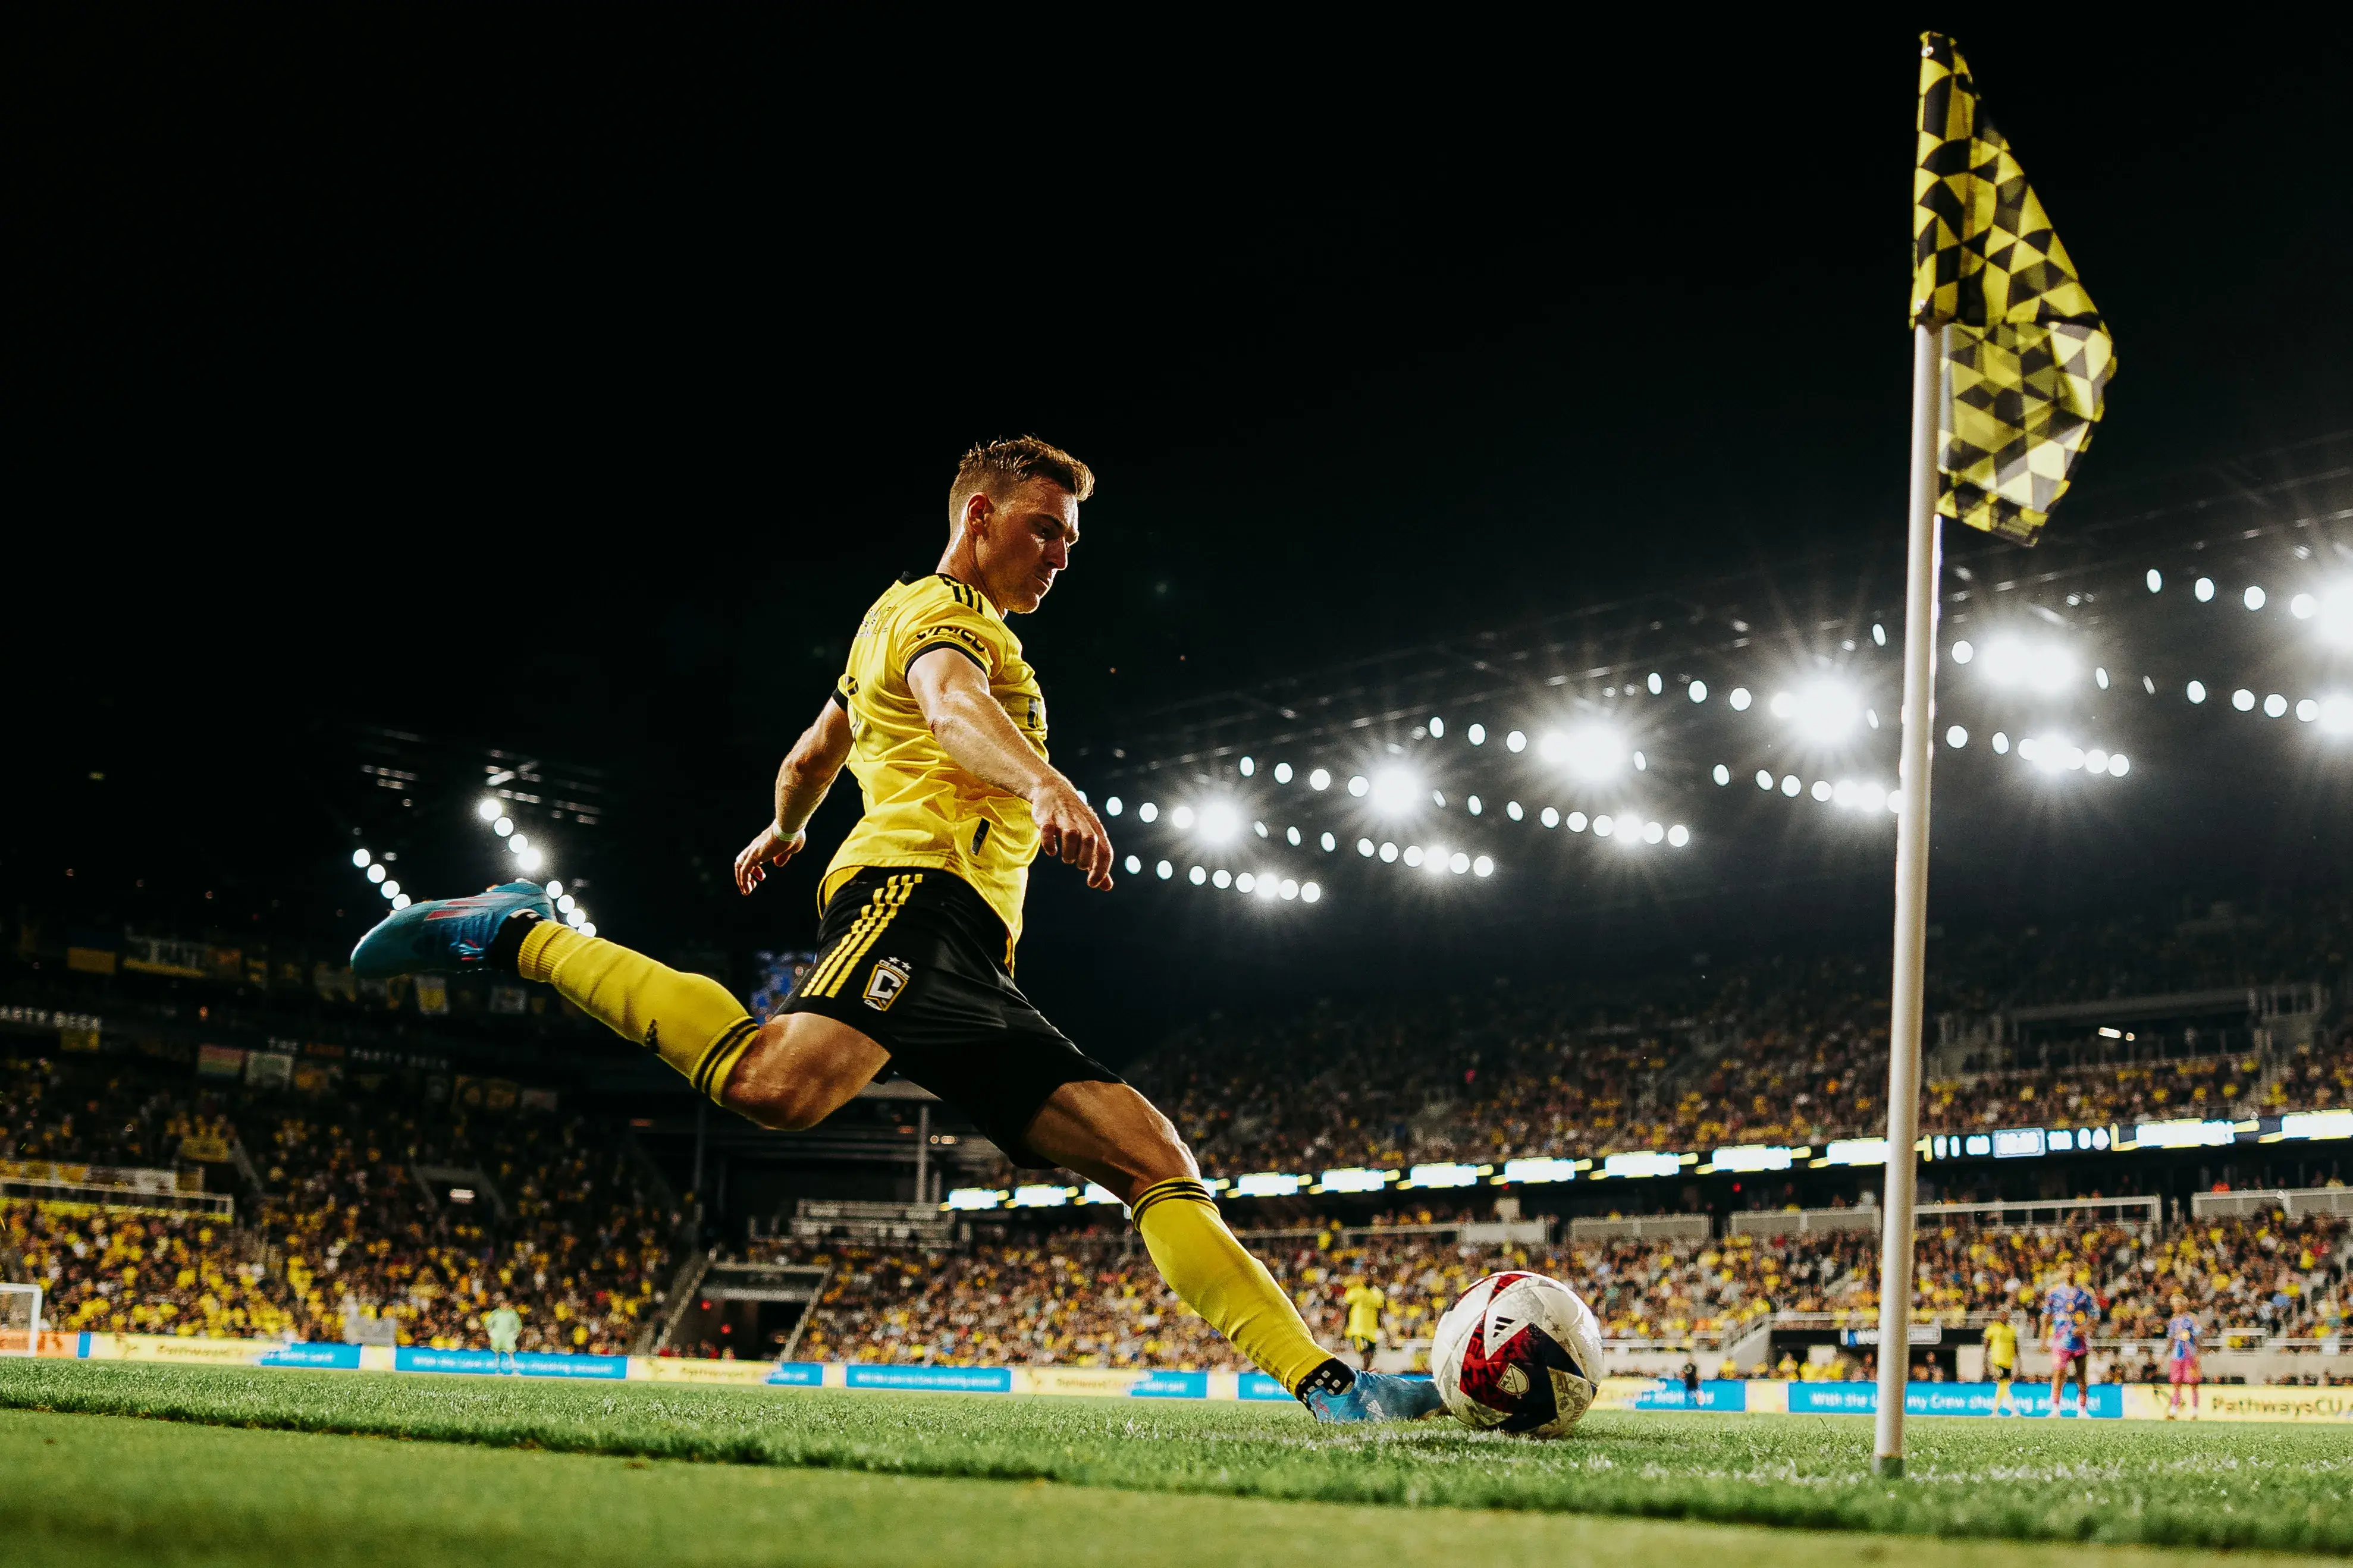 A Crew player kicking a soccer ball during a Crew night game